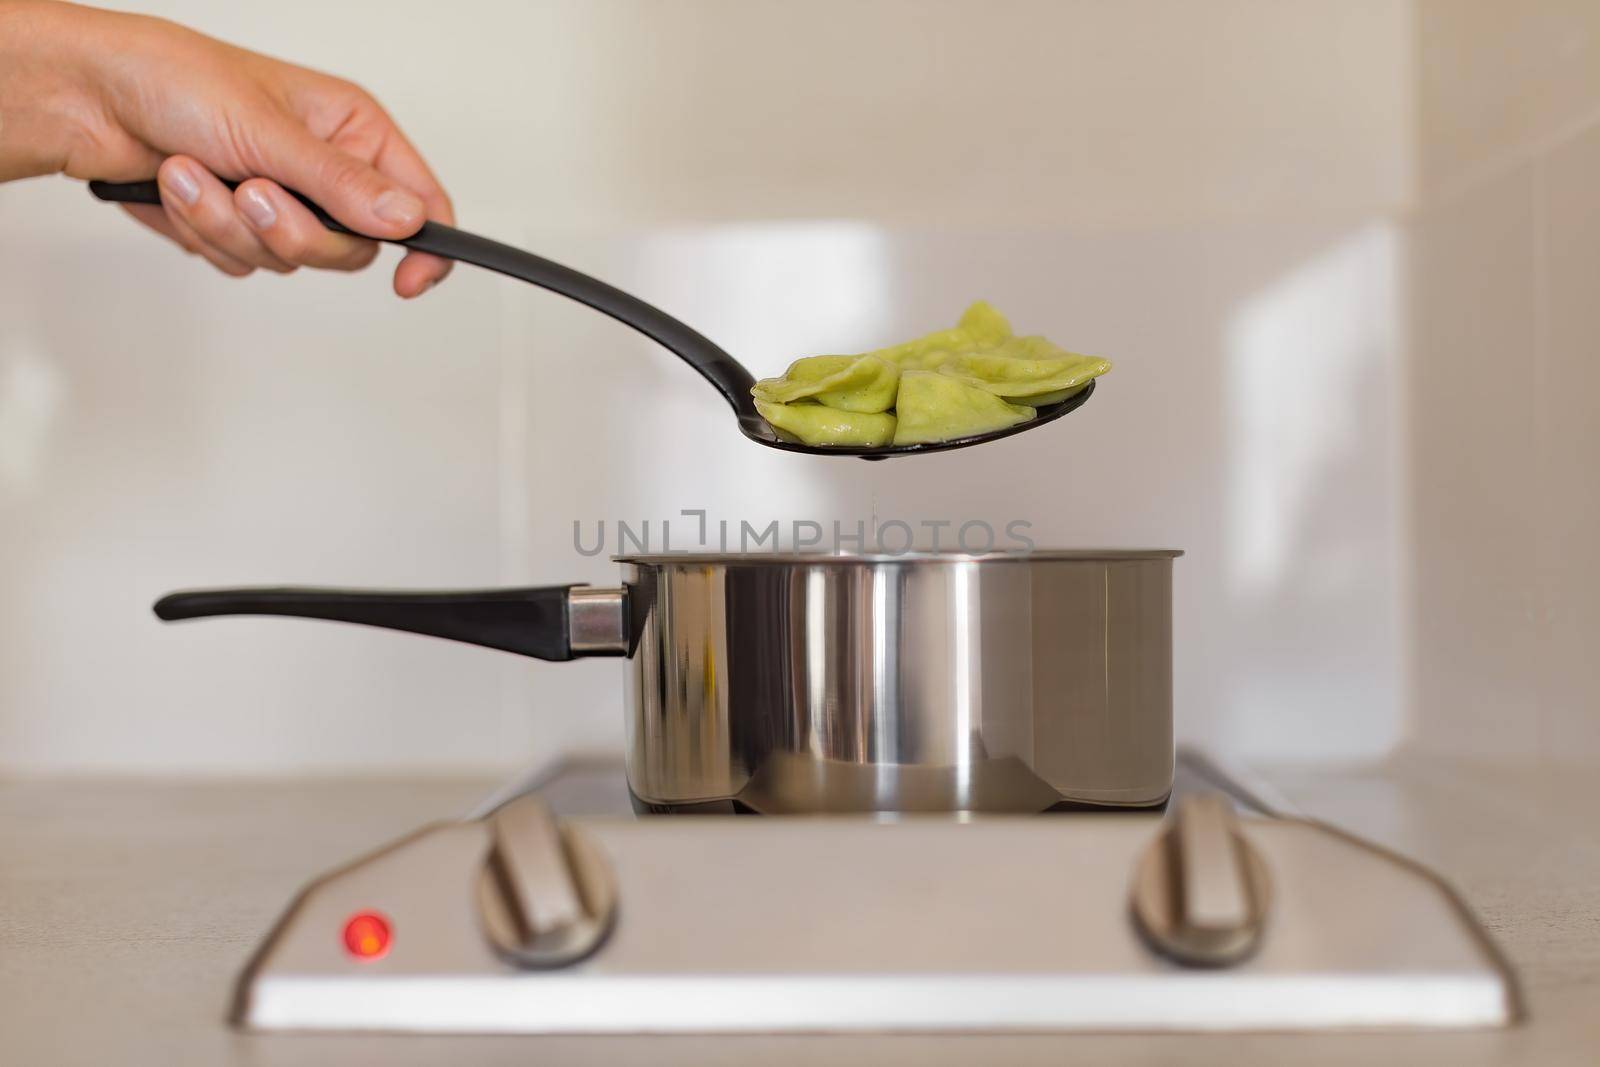 A hand with a hollowed spoon takes out green vegetarian dumplings from the ladle, which is standing on the stove